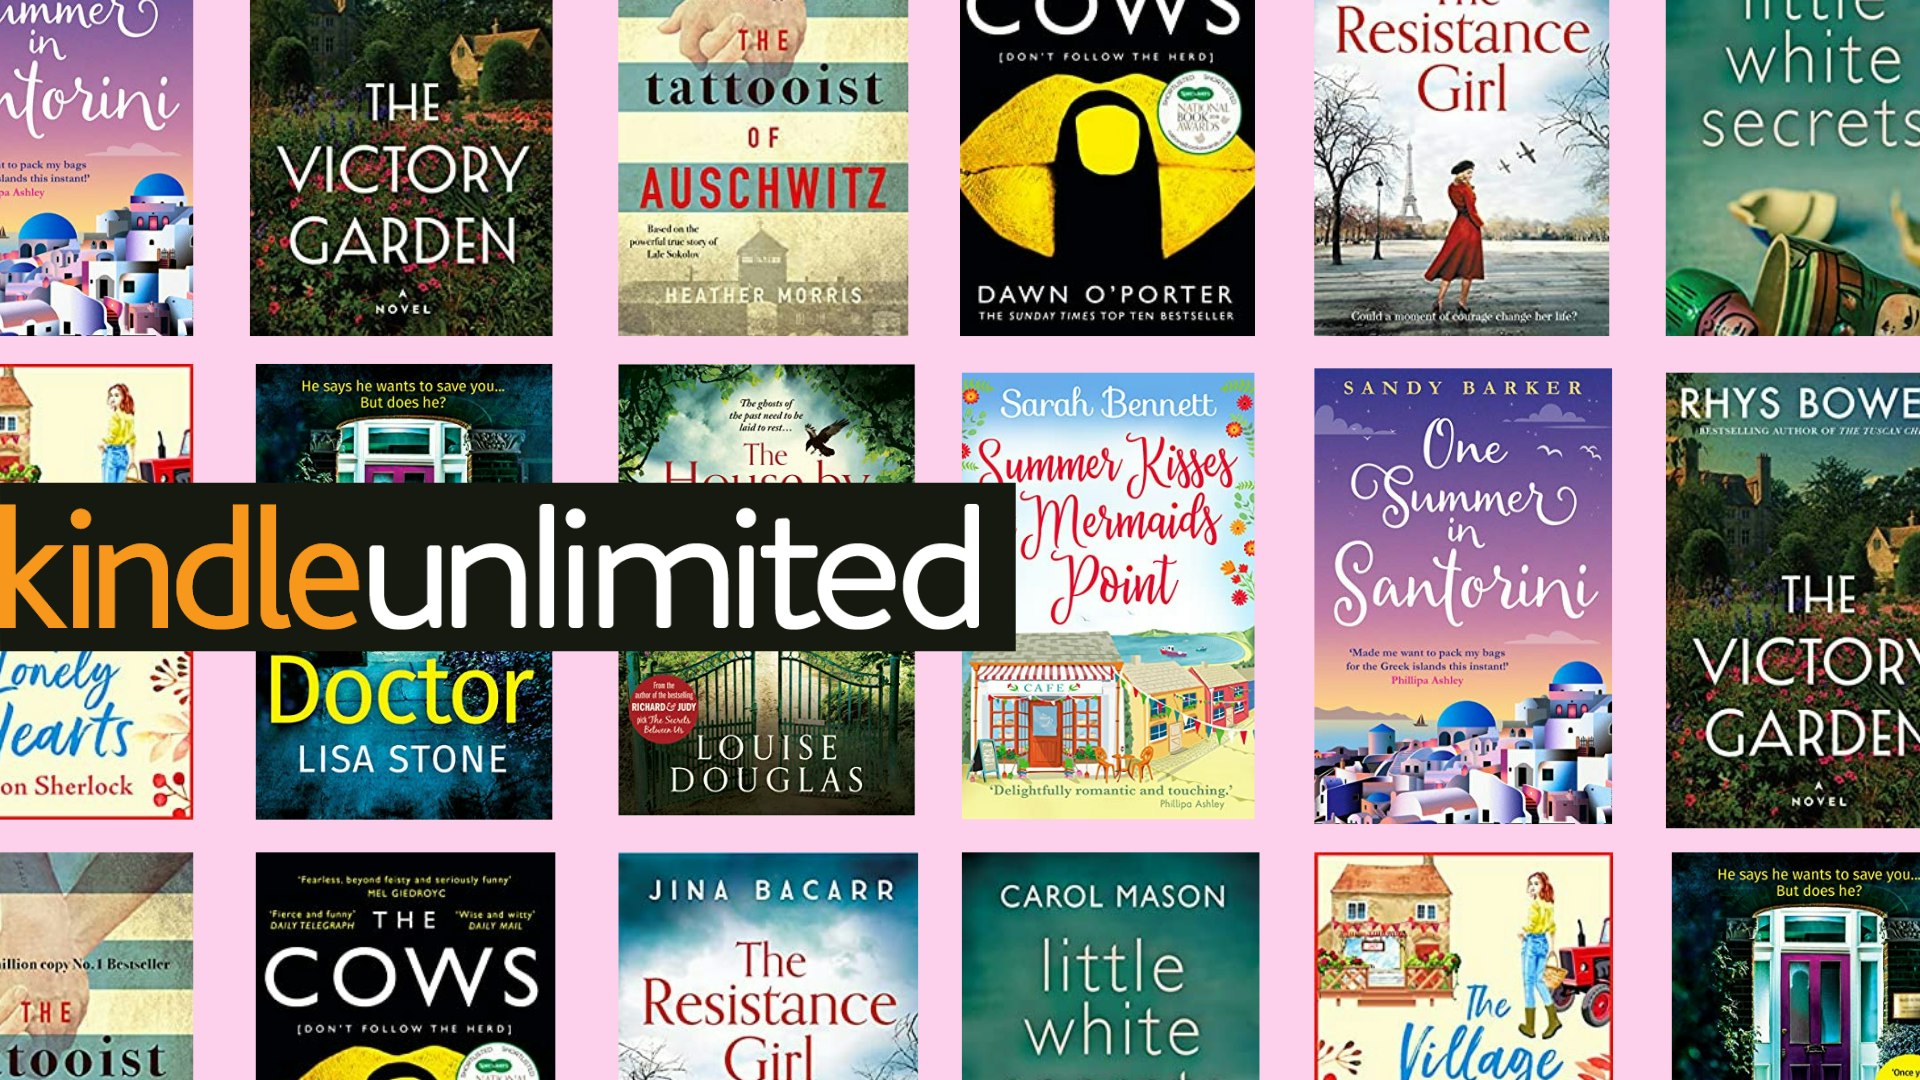 How Does Kindle Unlimited Work? The Basics And Beyond